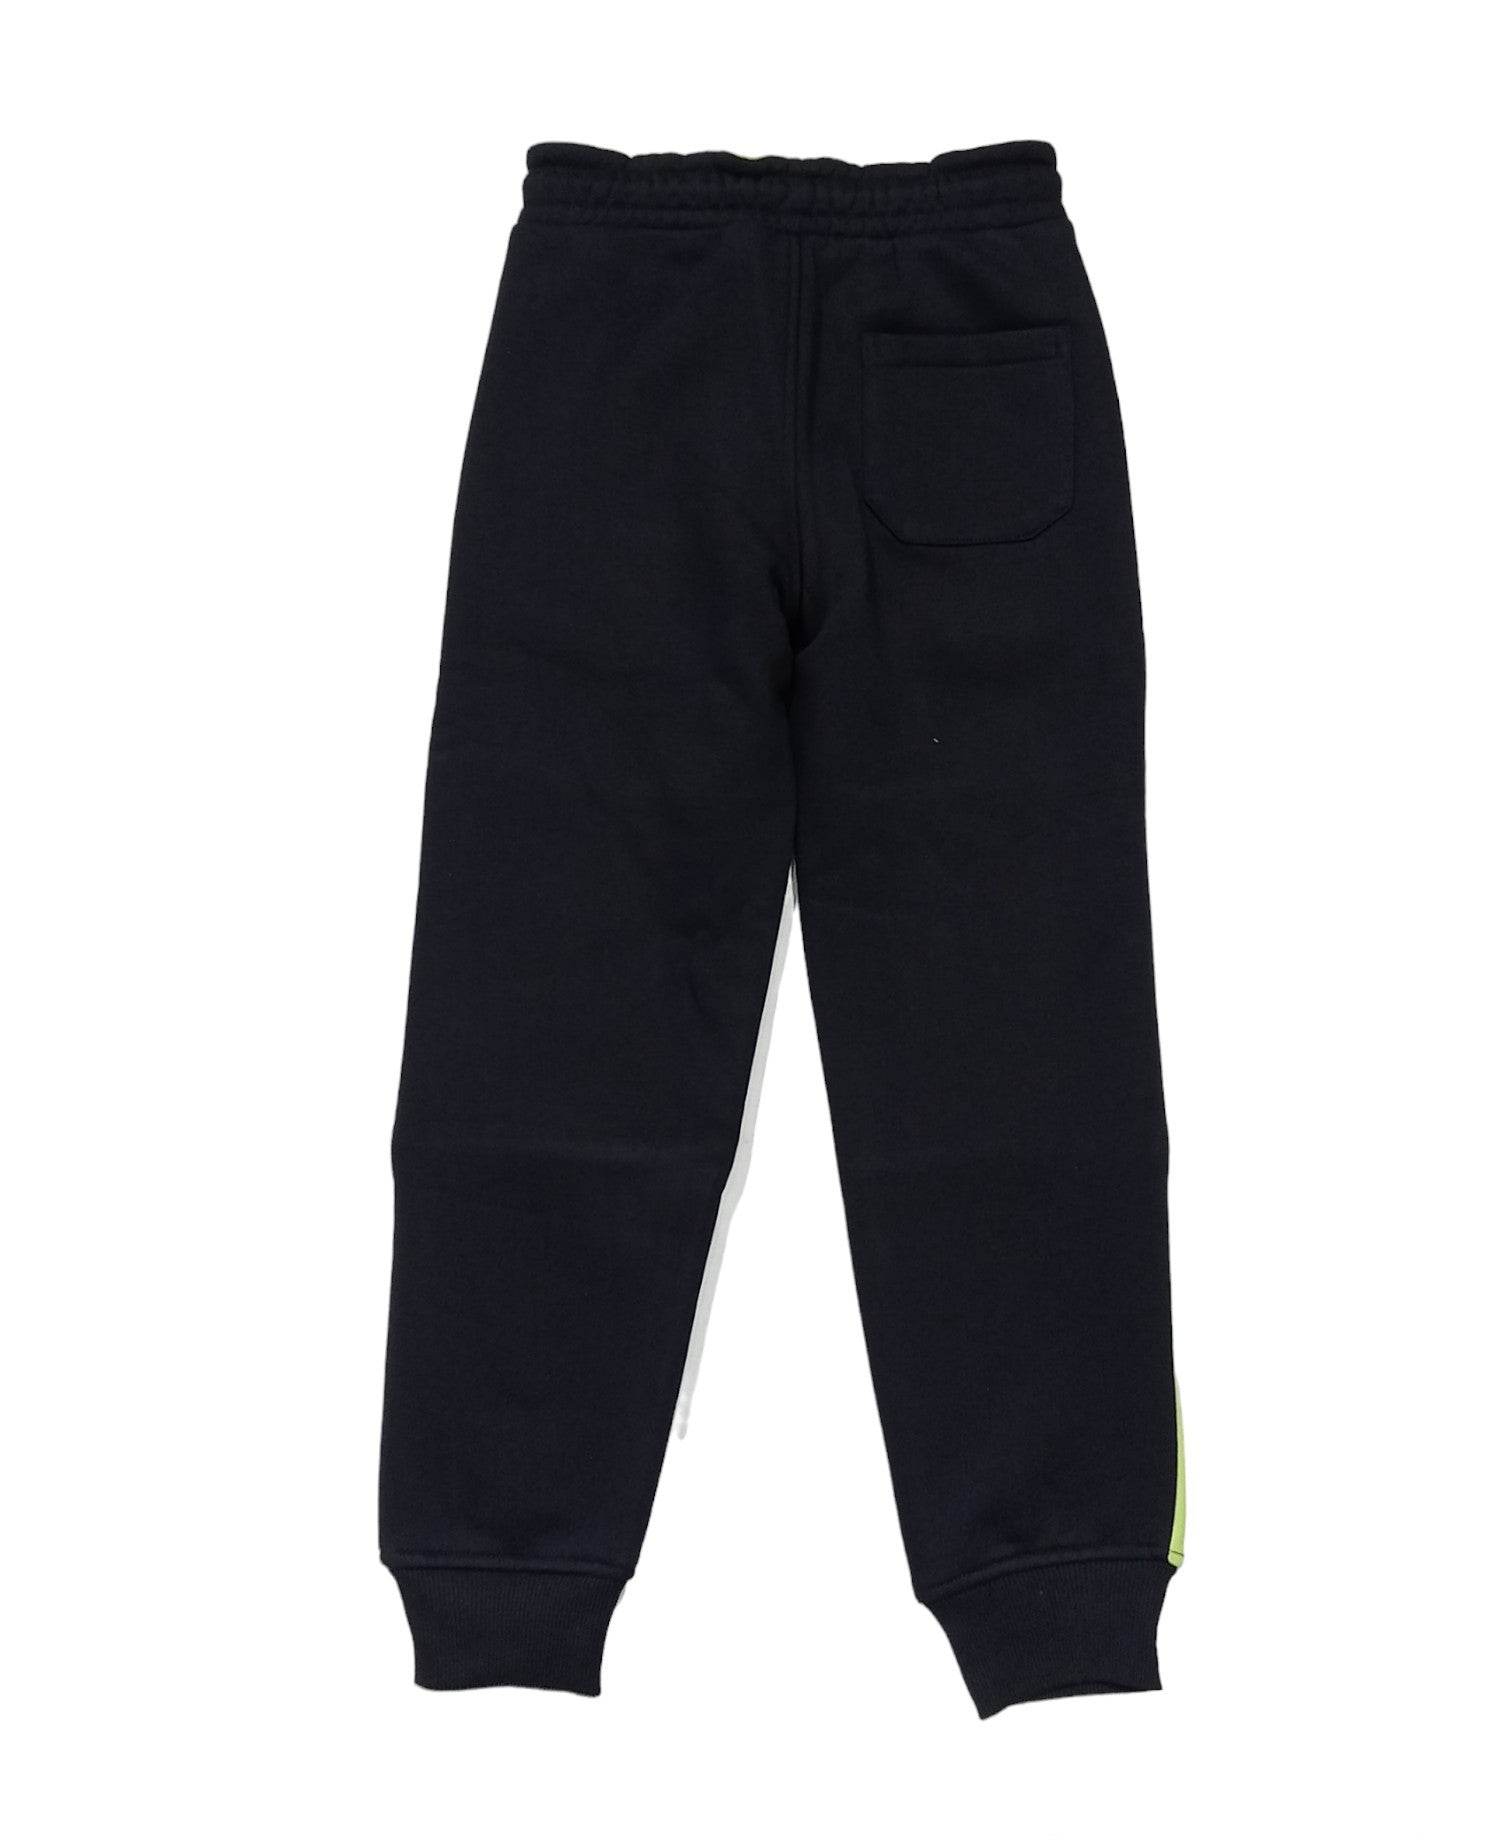 Boys Black solid Cotton Elasticated Track Pant